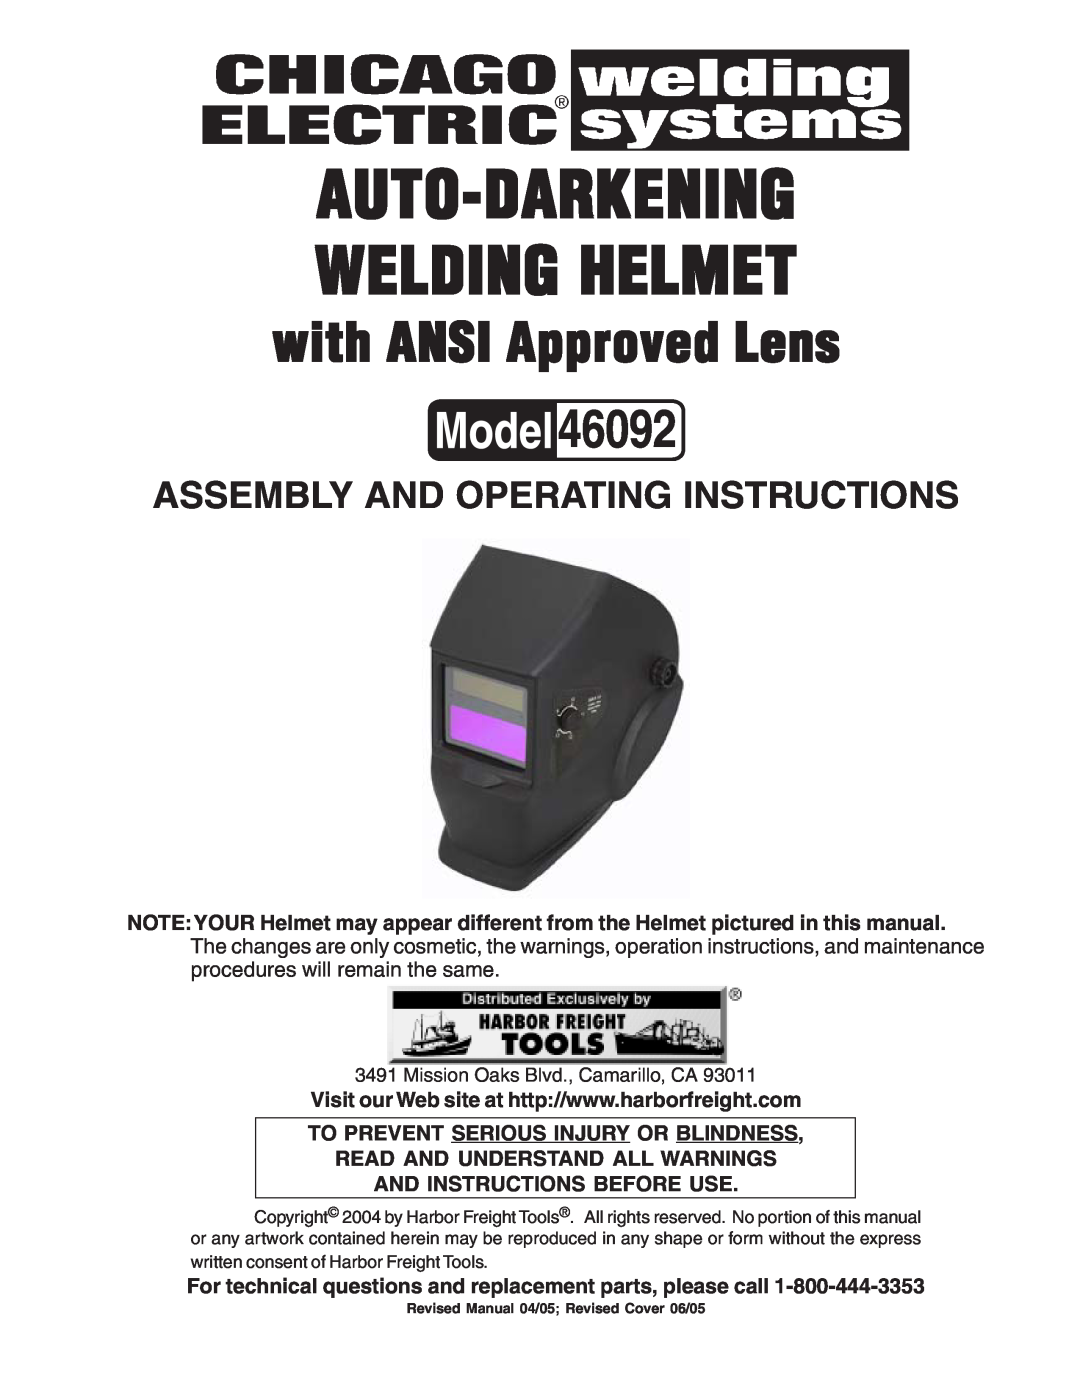 Harbor Freight Tools 46092 operating instructions To Prevent Serious Injury Or Blindness, Auto-Darkening Welding Helmet 